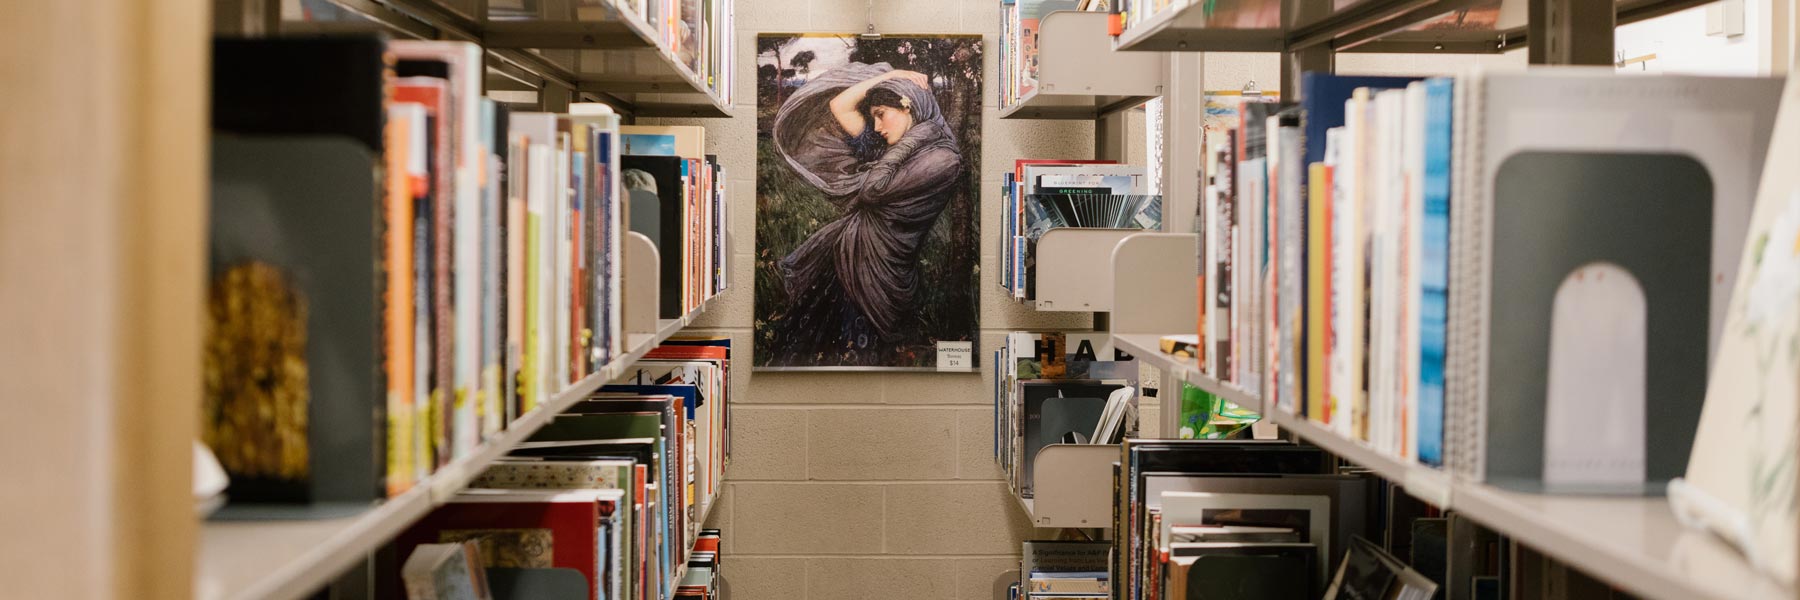 Bookshelves and a wall with a painting of a woman on it.